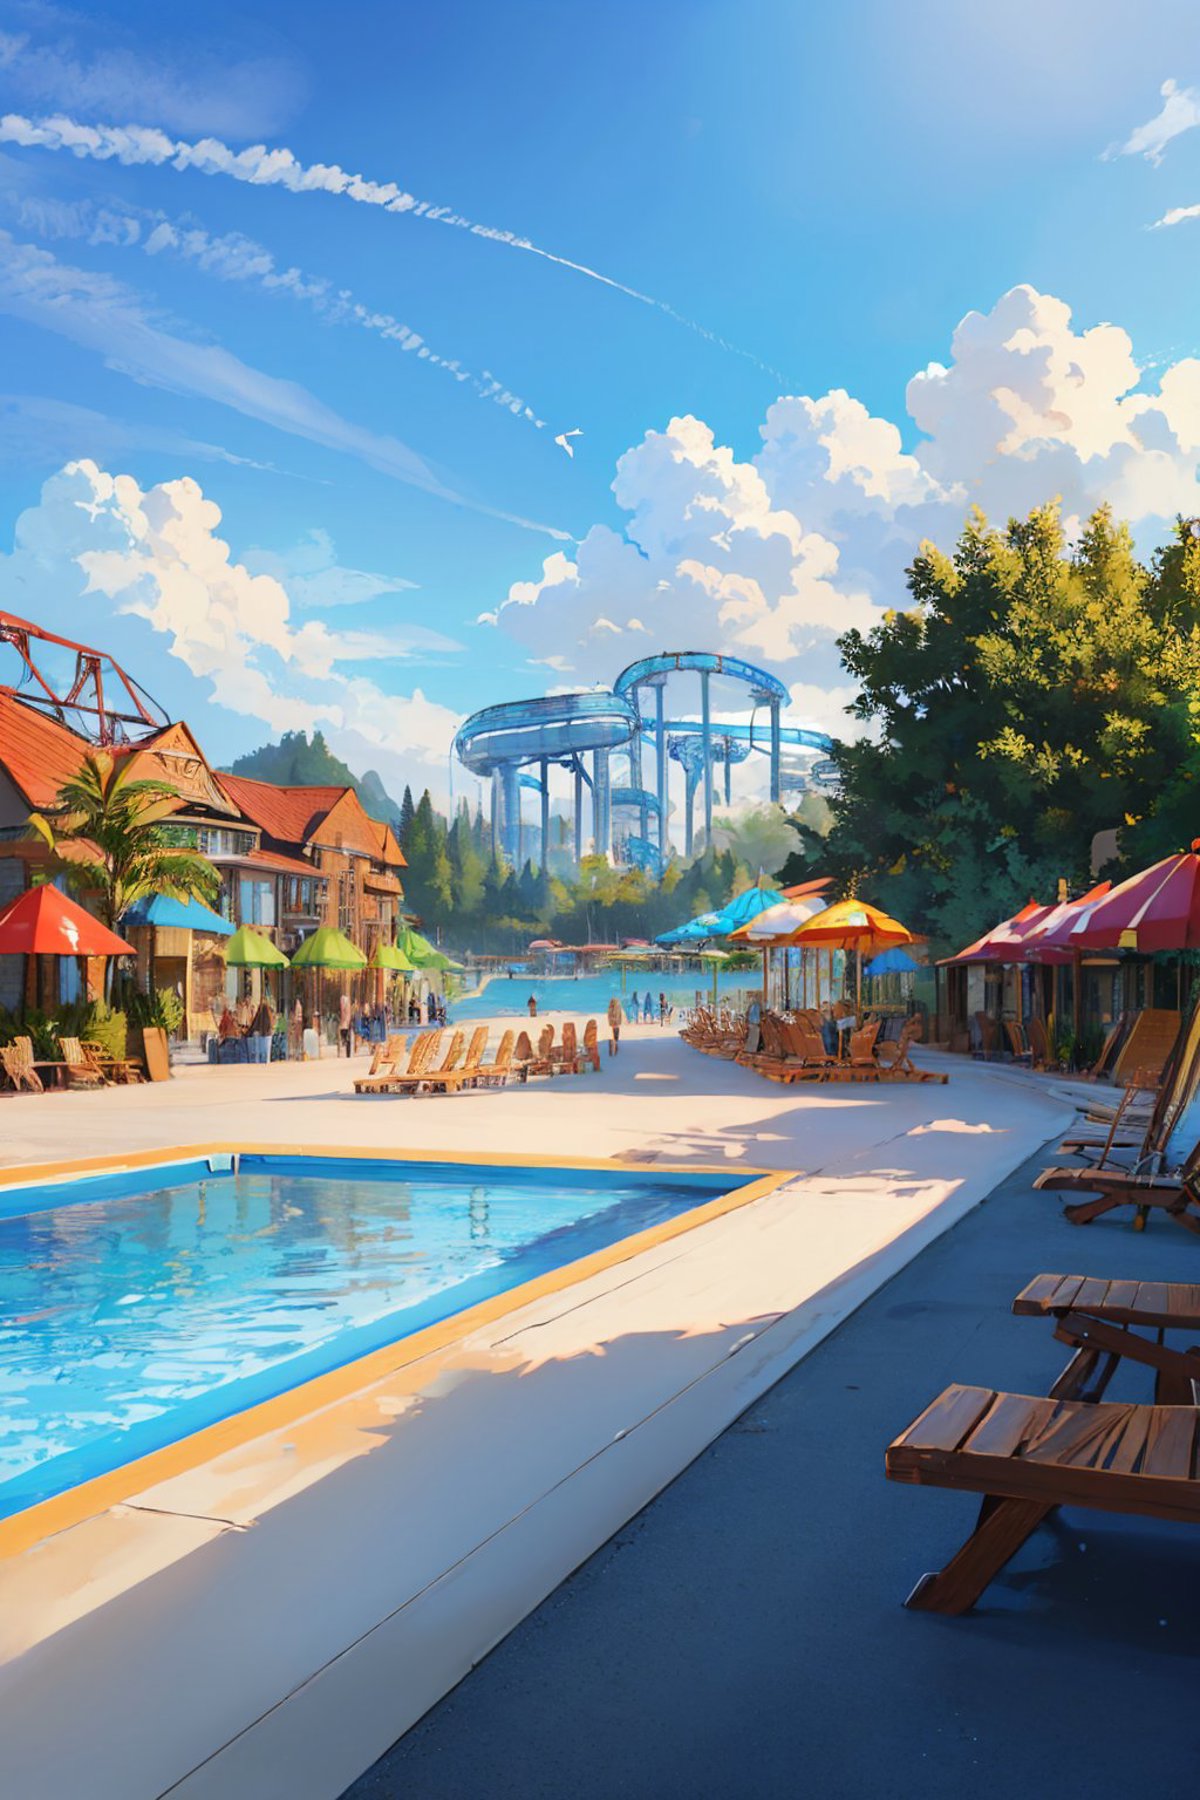 Waterpark | Background image by justTNP